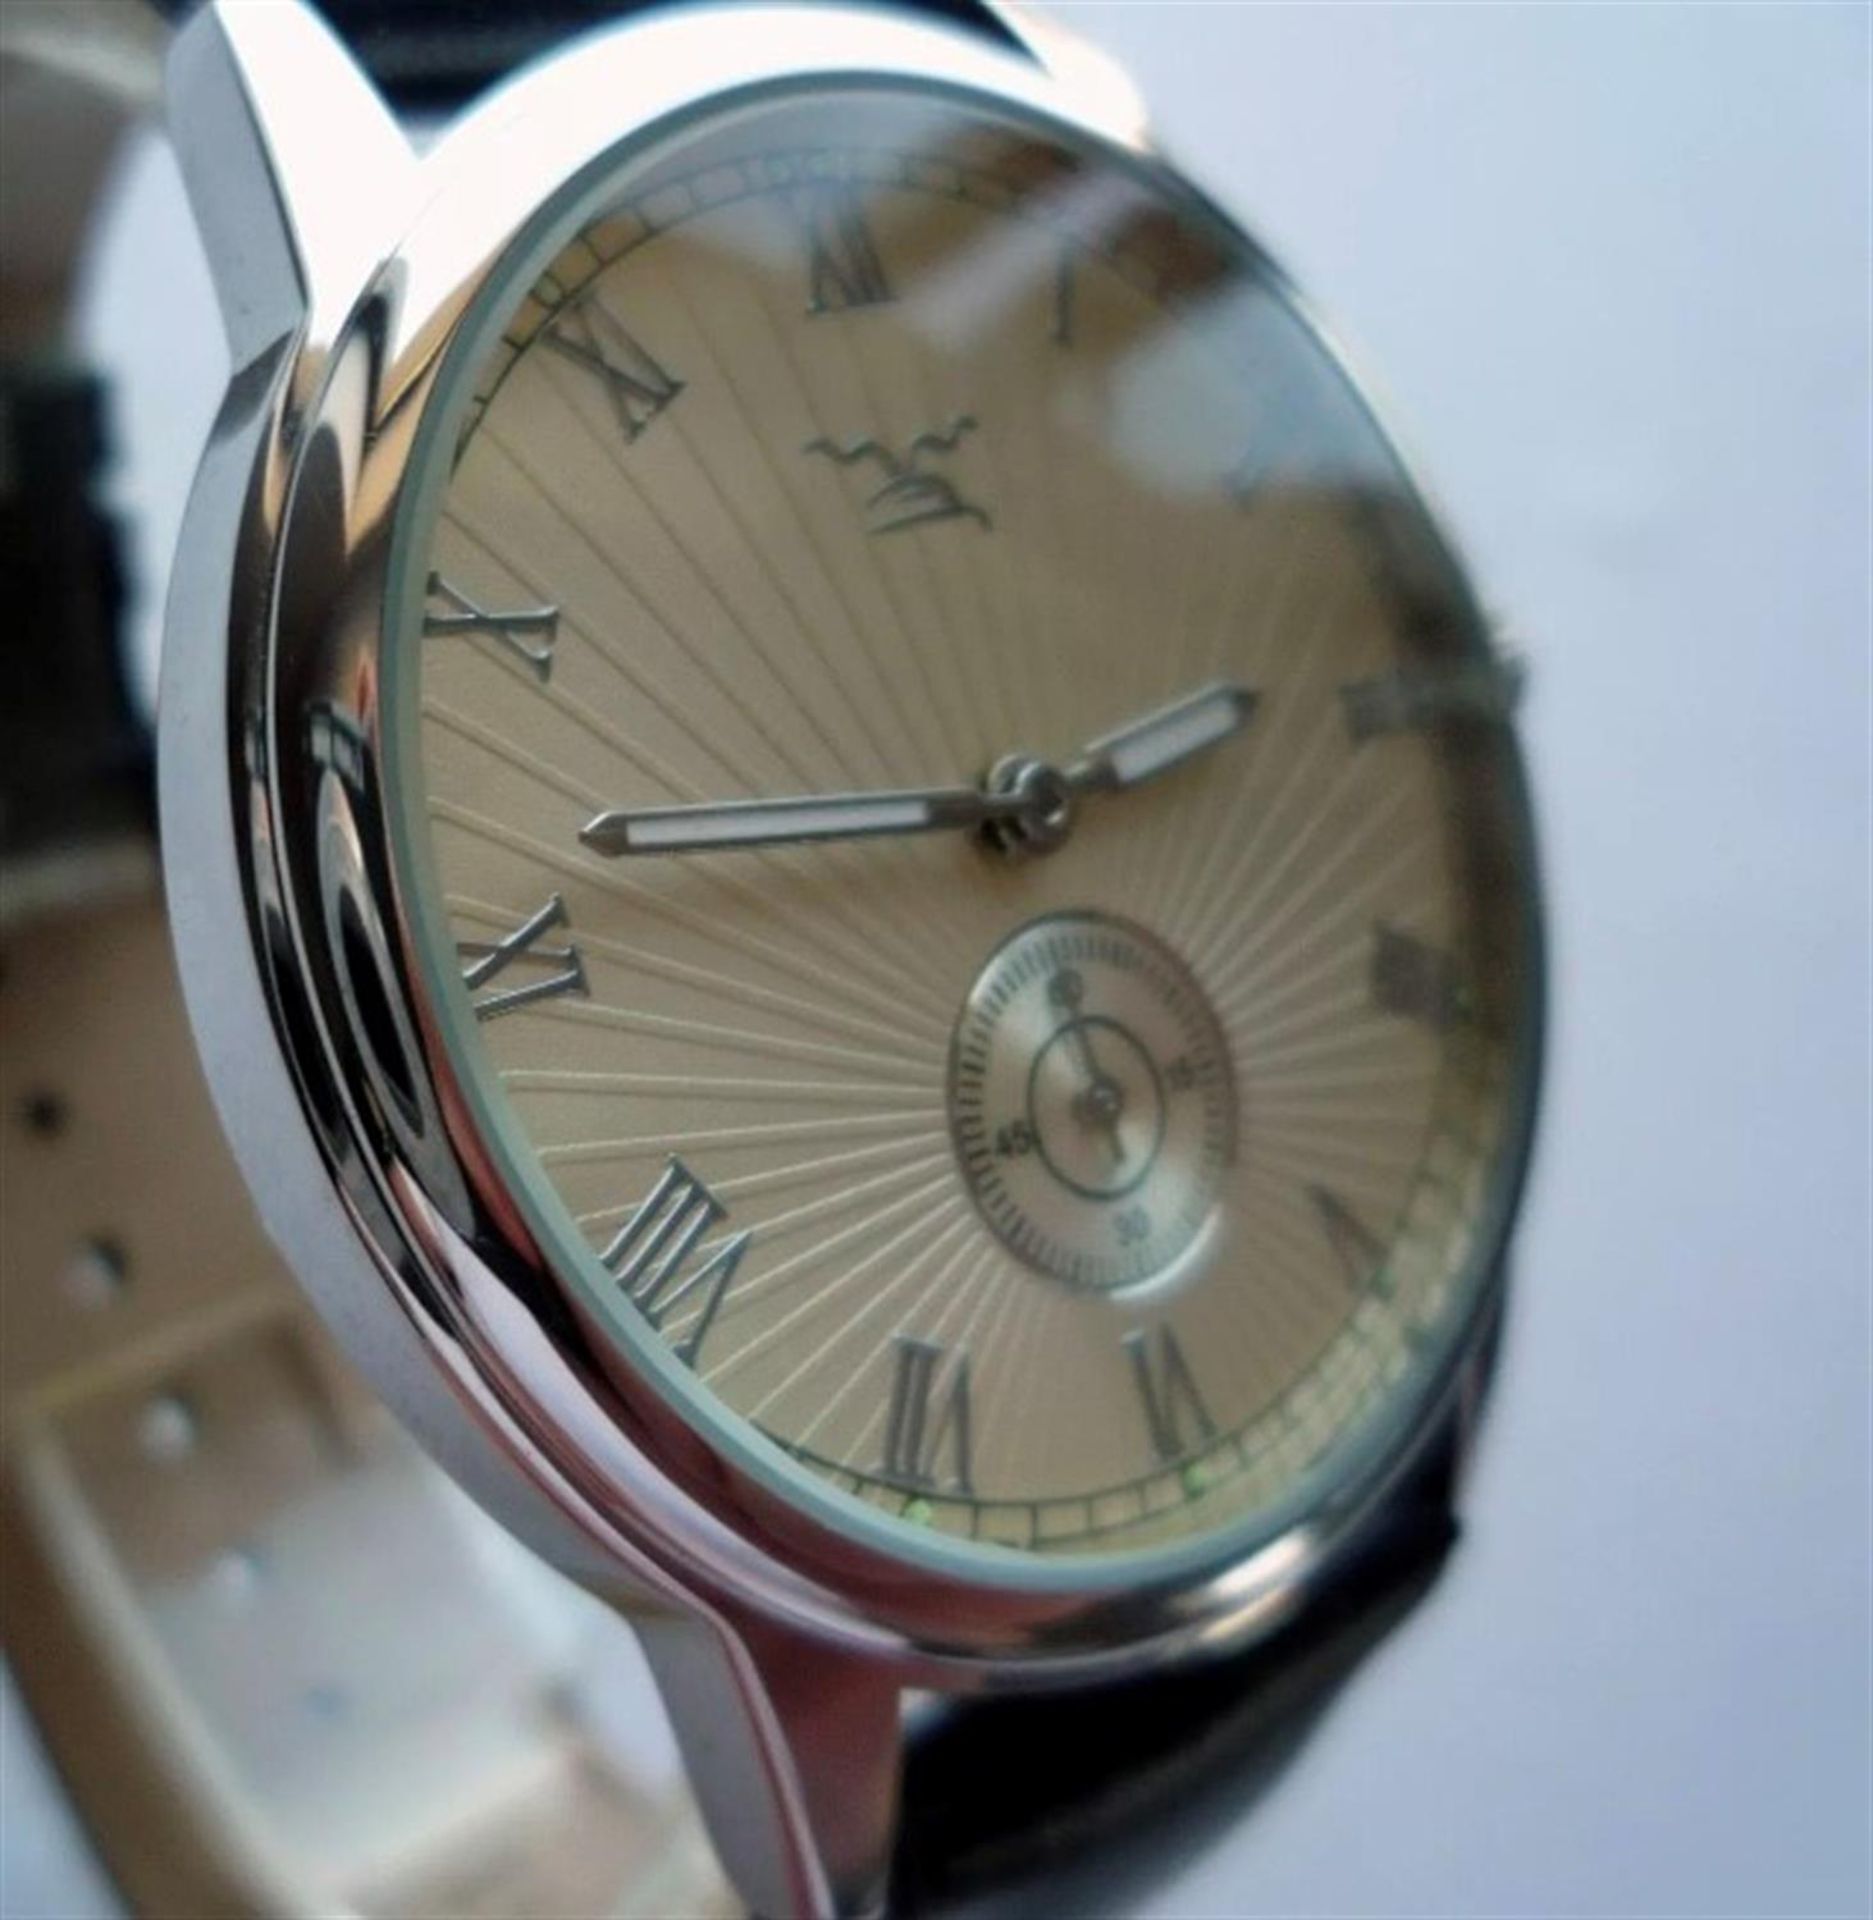 A Mercedes-Benz Classic Art Deco Style Gullwing Watch - Image 8 of 10